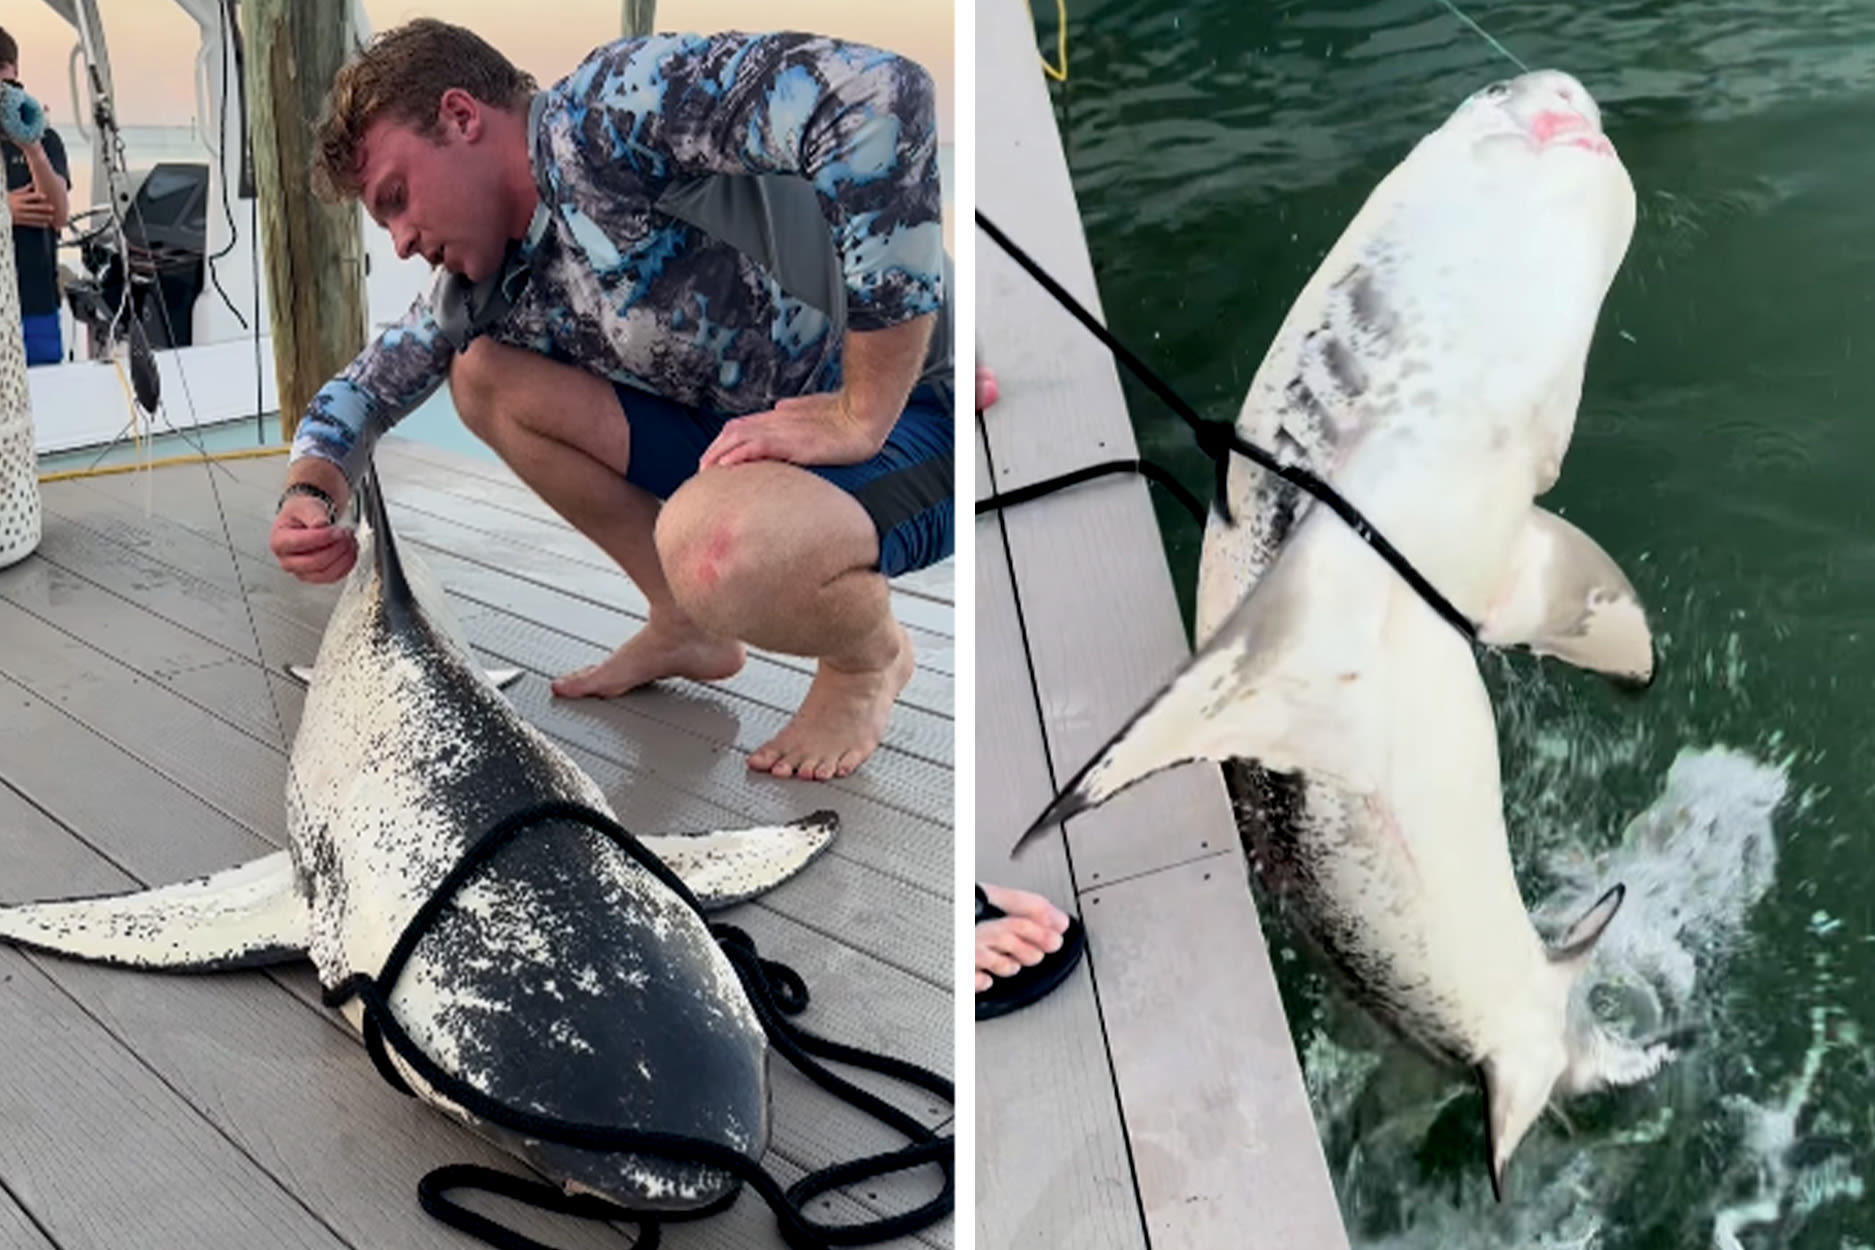 Watch: ‘Incredibly Rare’ Piebald Shark Caught and Released in Florida